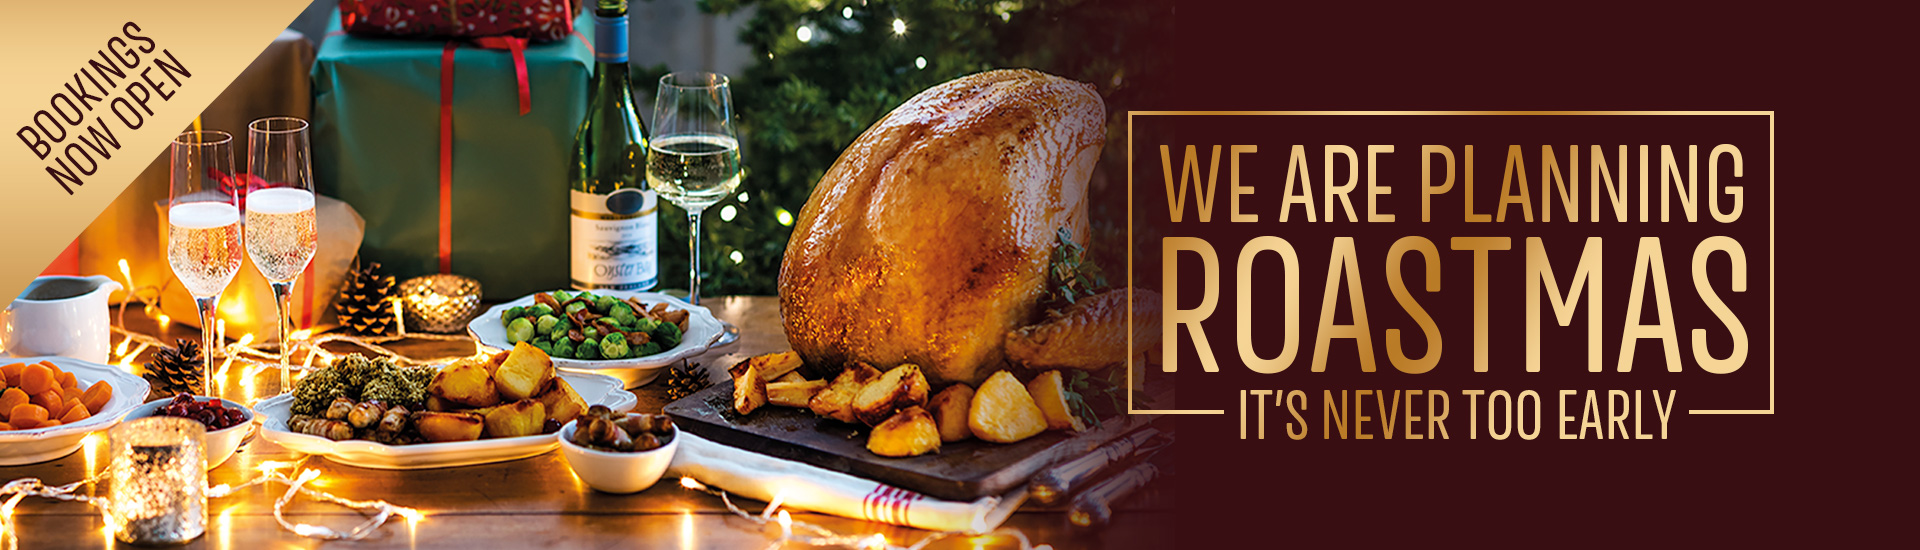 Christmas 2022 at your local Toby Carvery Clacton On Sea | Home of the Roast